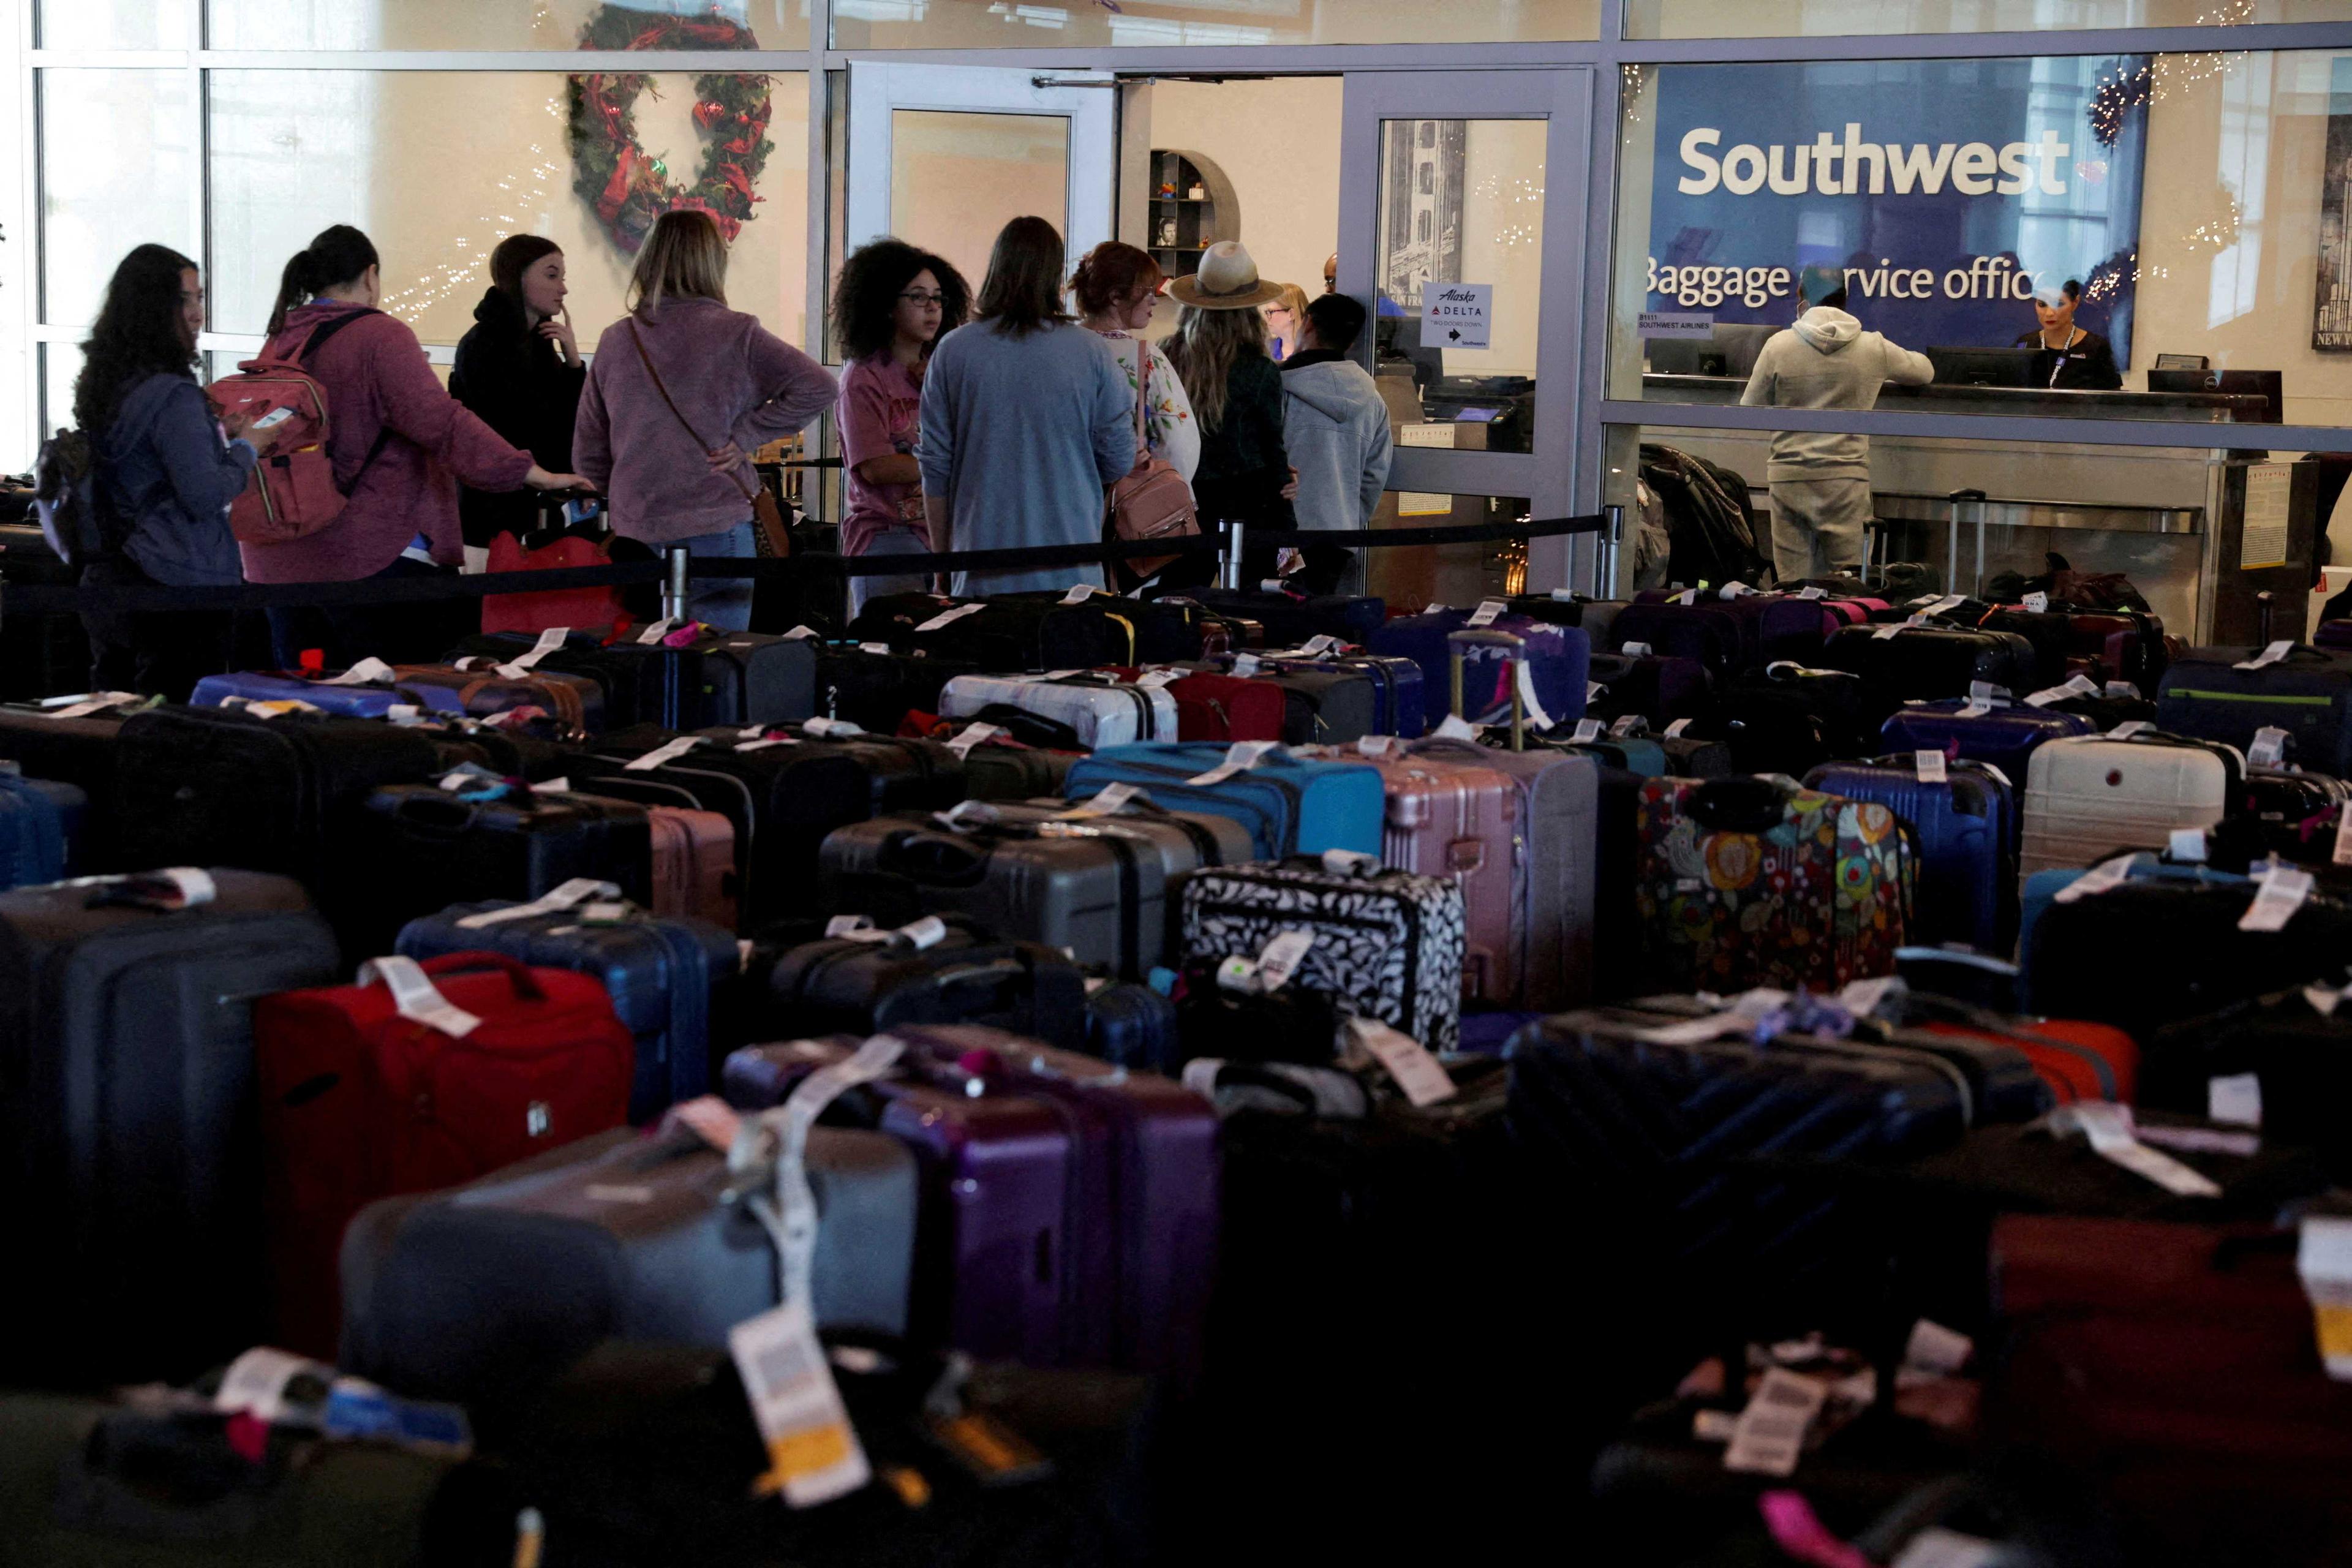 Southwest Airlines passengers wait in line at the baggage services office after US airlines cancelled thousands of flights due to a massive winter storm, at Dallas Love Field Airport in Dallas, Texas, Dec 28, 2022. Photo: Reuters